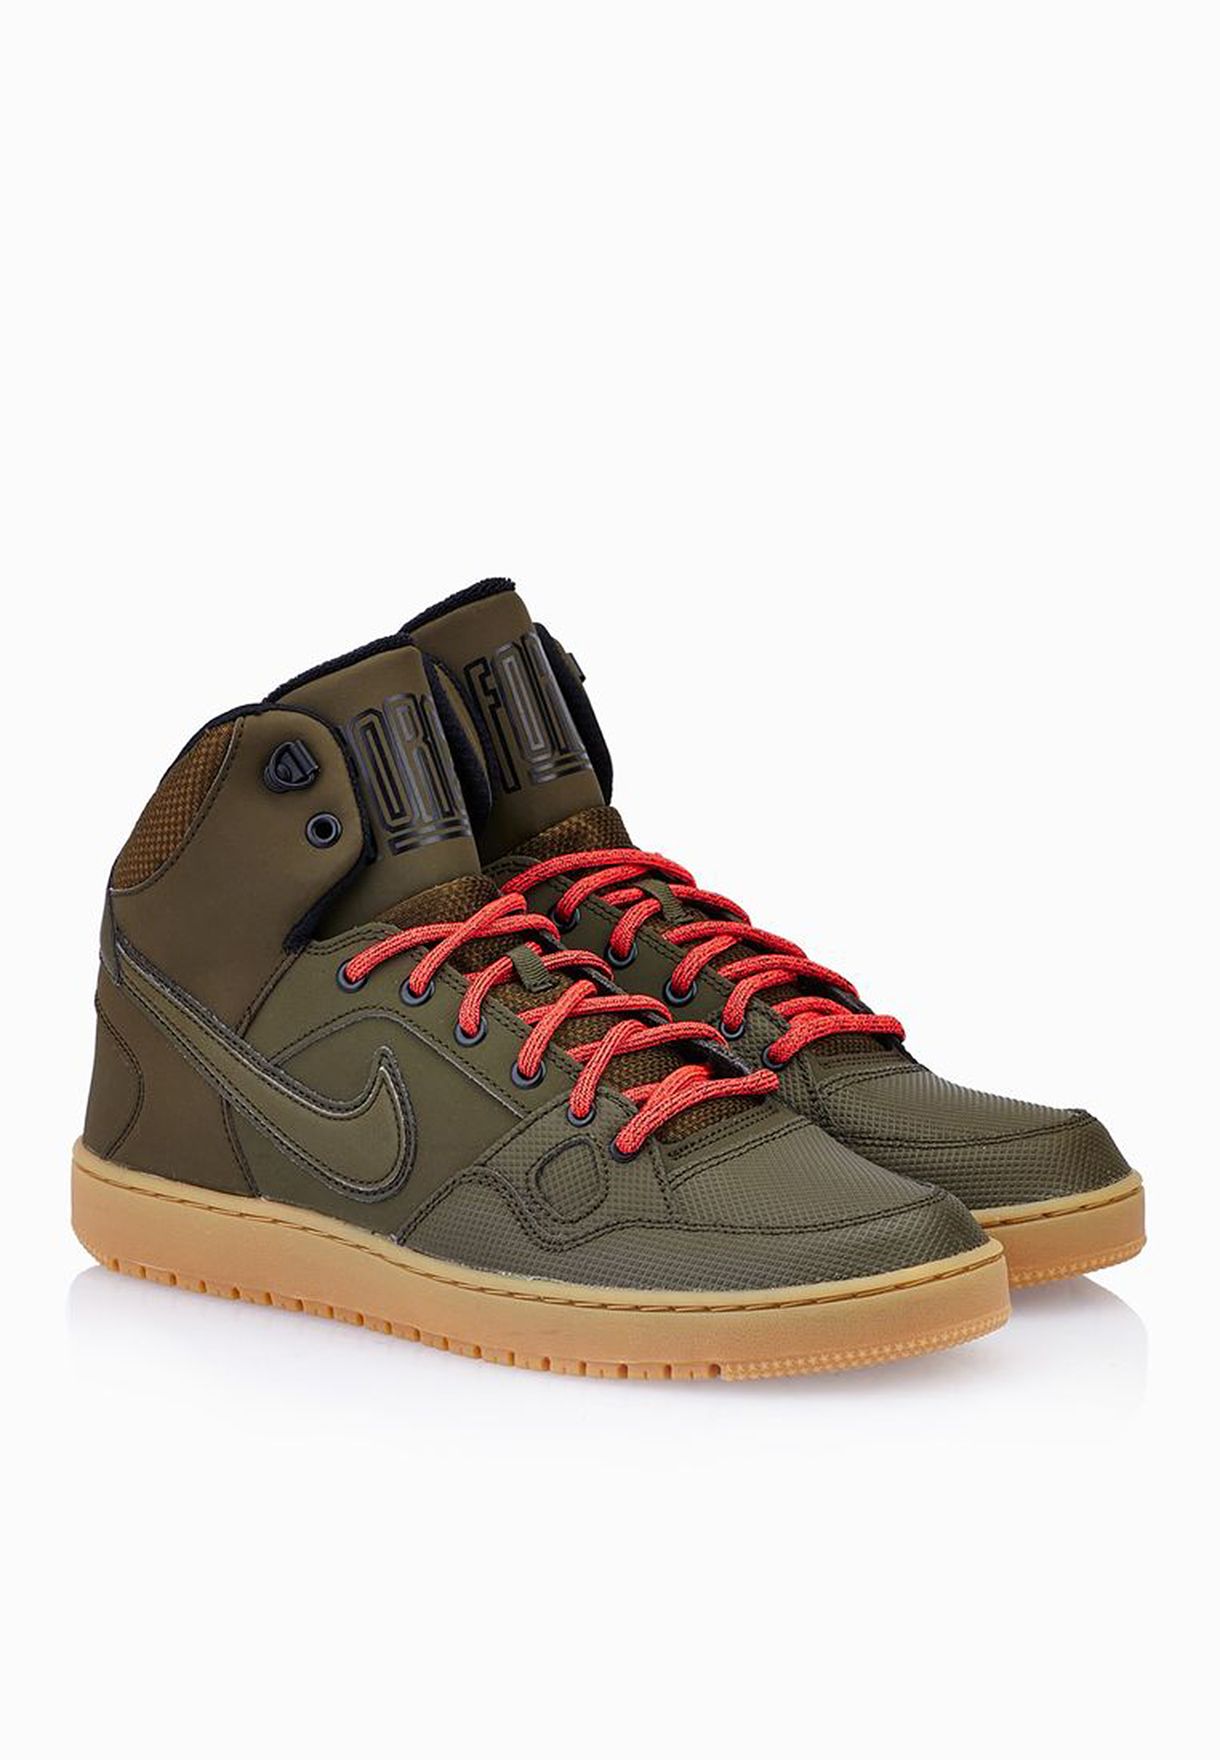 nike son of force mid winter green